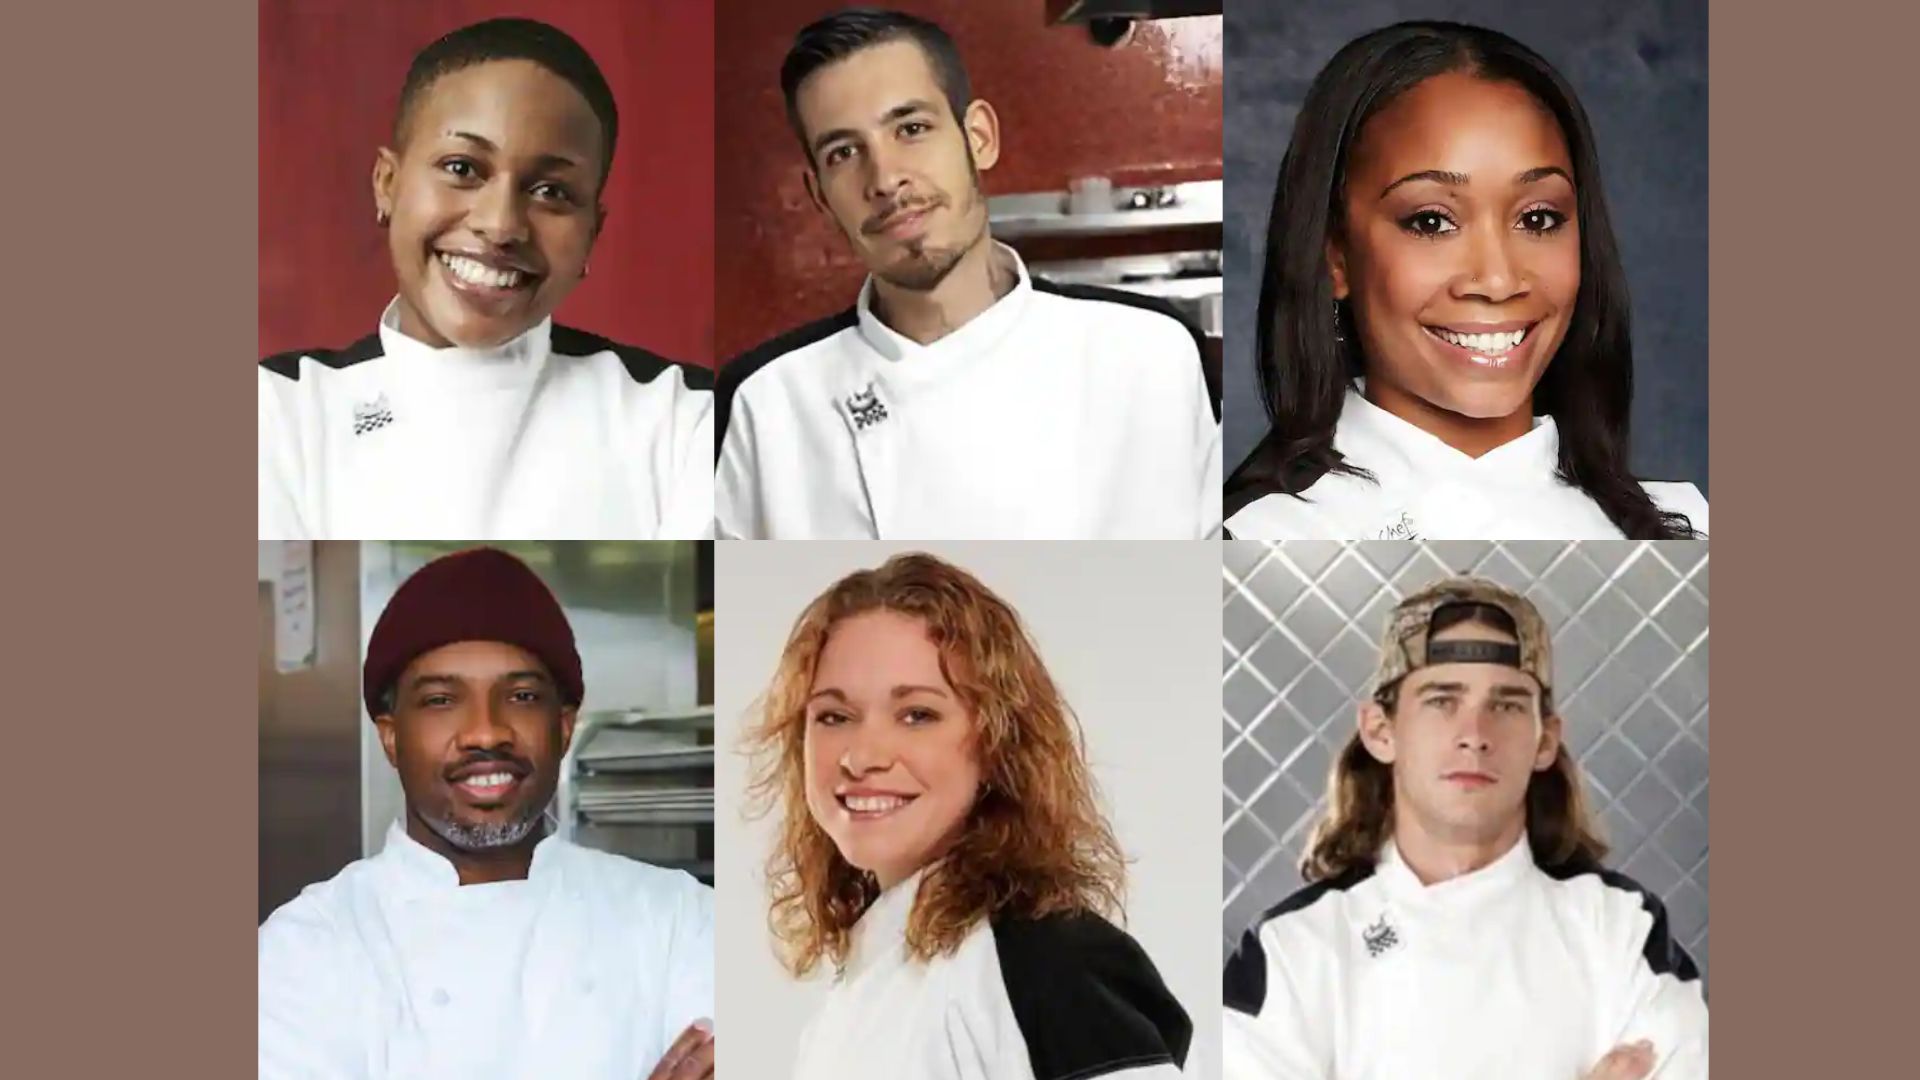 Hell's Kitchen winners: where are they now? (profiles and photos)